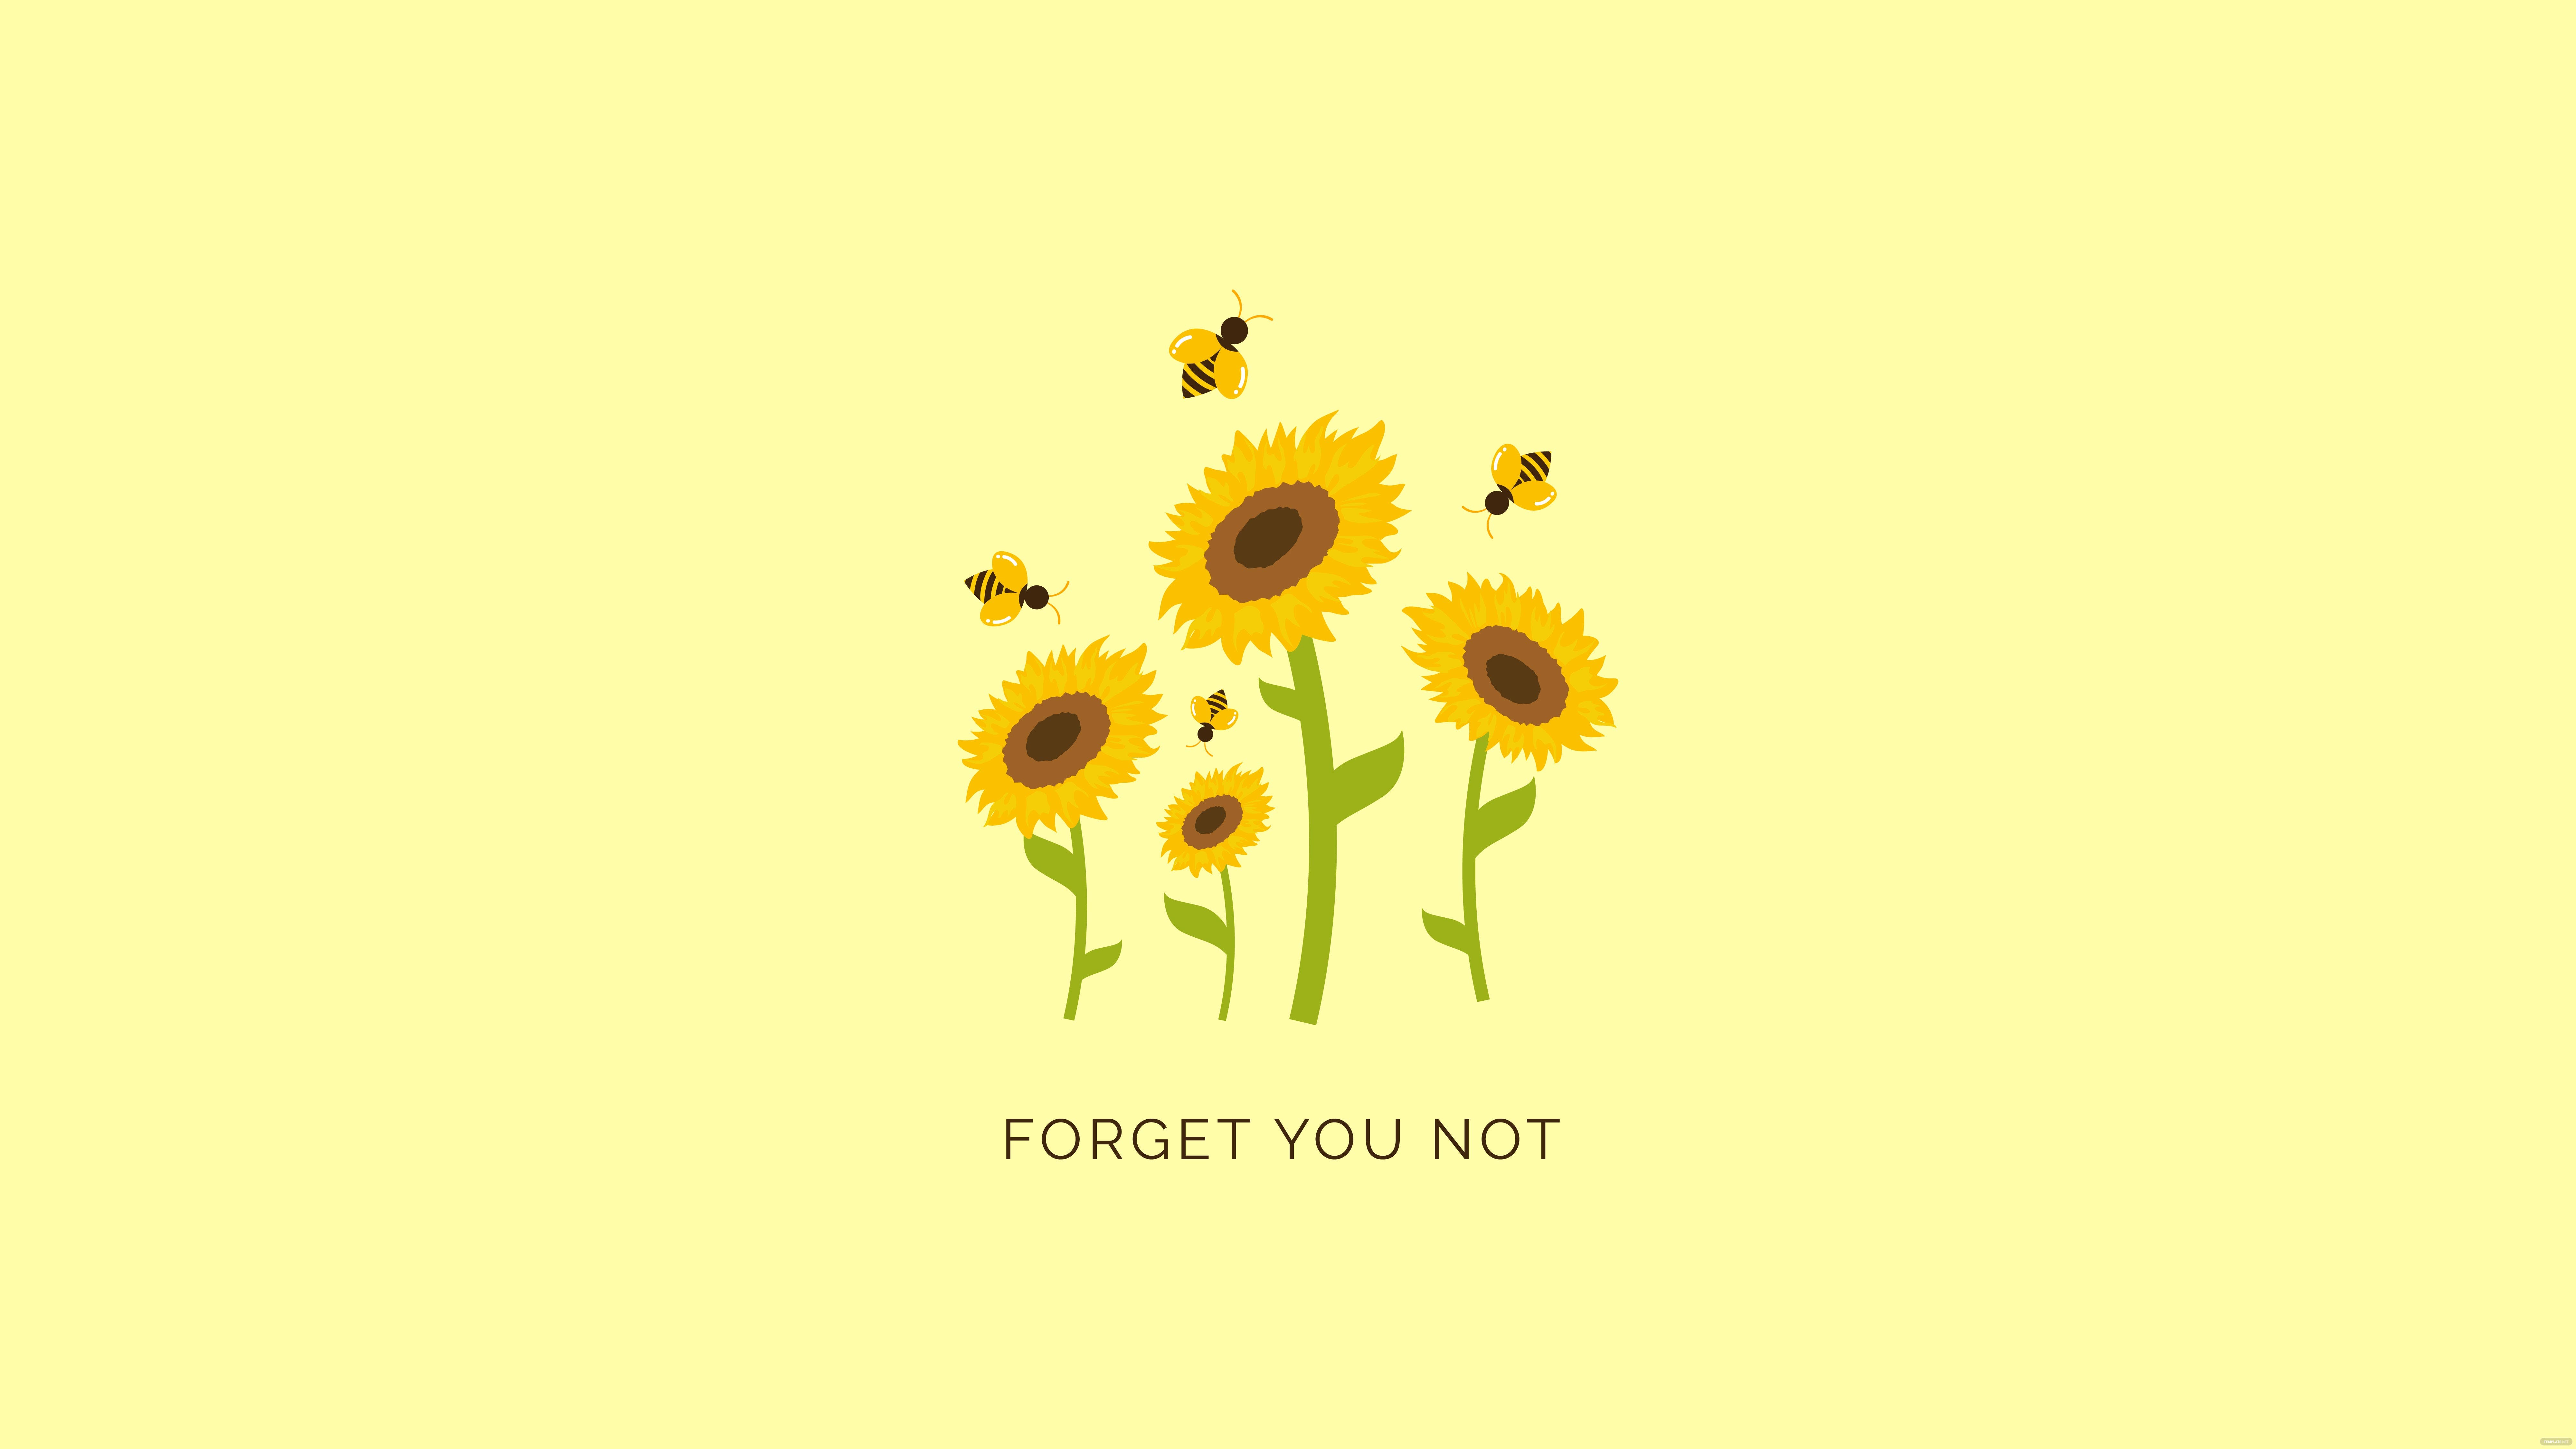 Forget you not sunflowers wallpaper - Bee